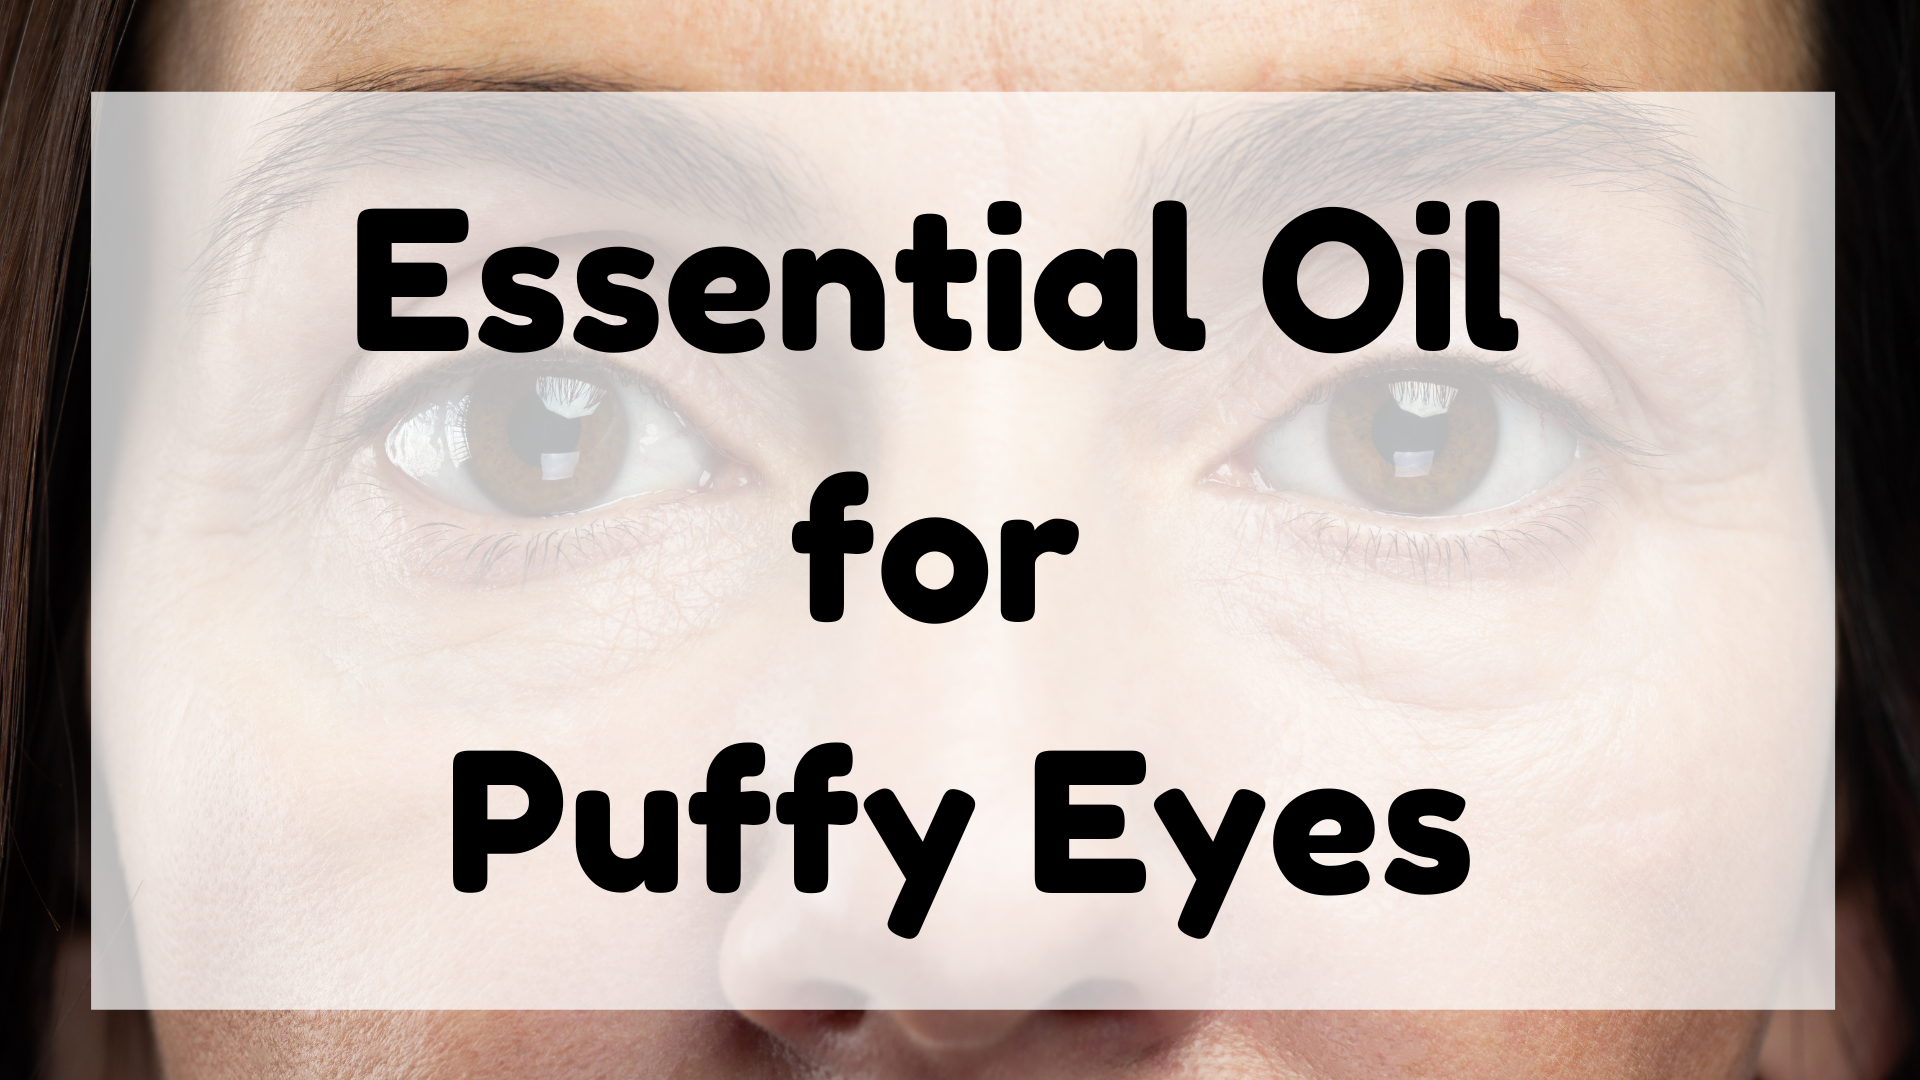 Essential Oil for Puffy Eyes featured image